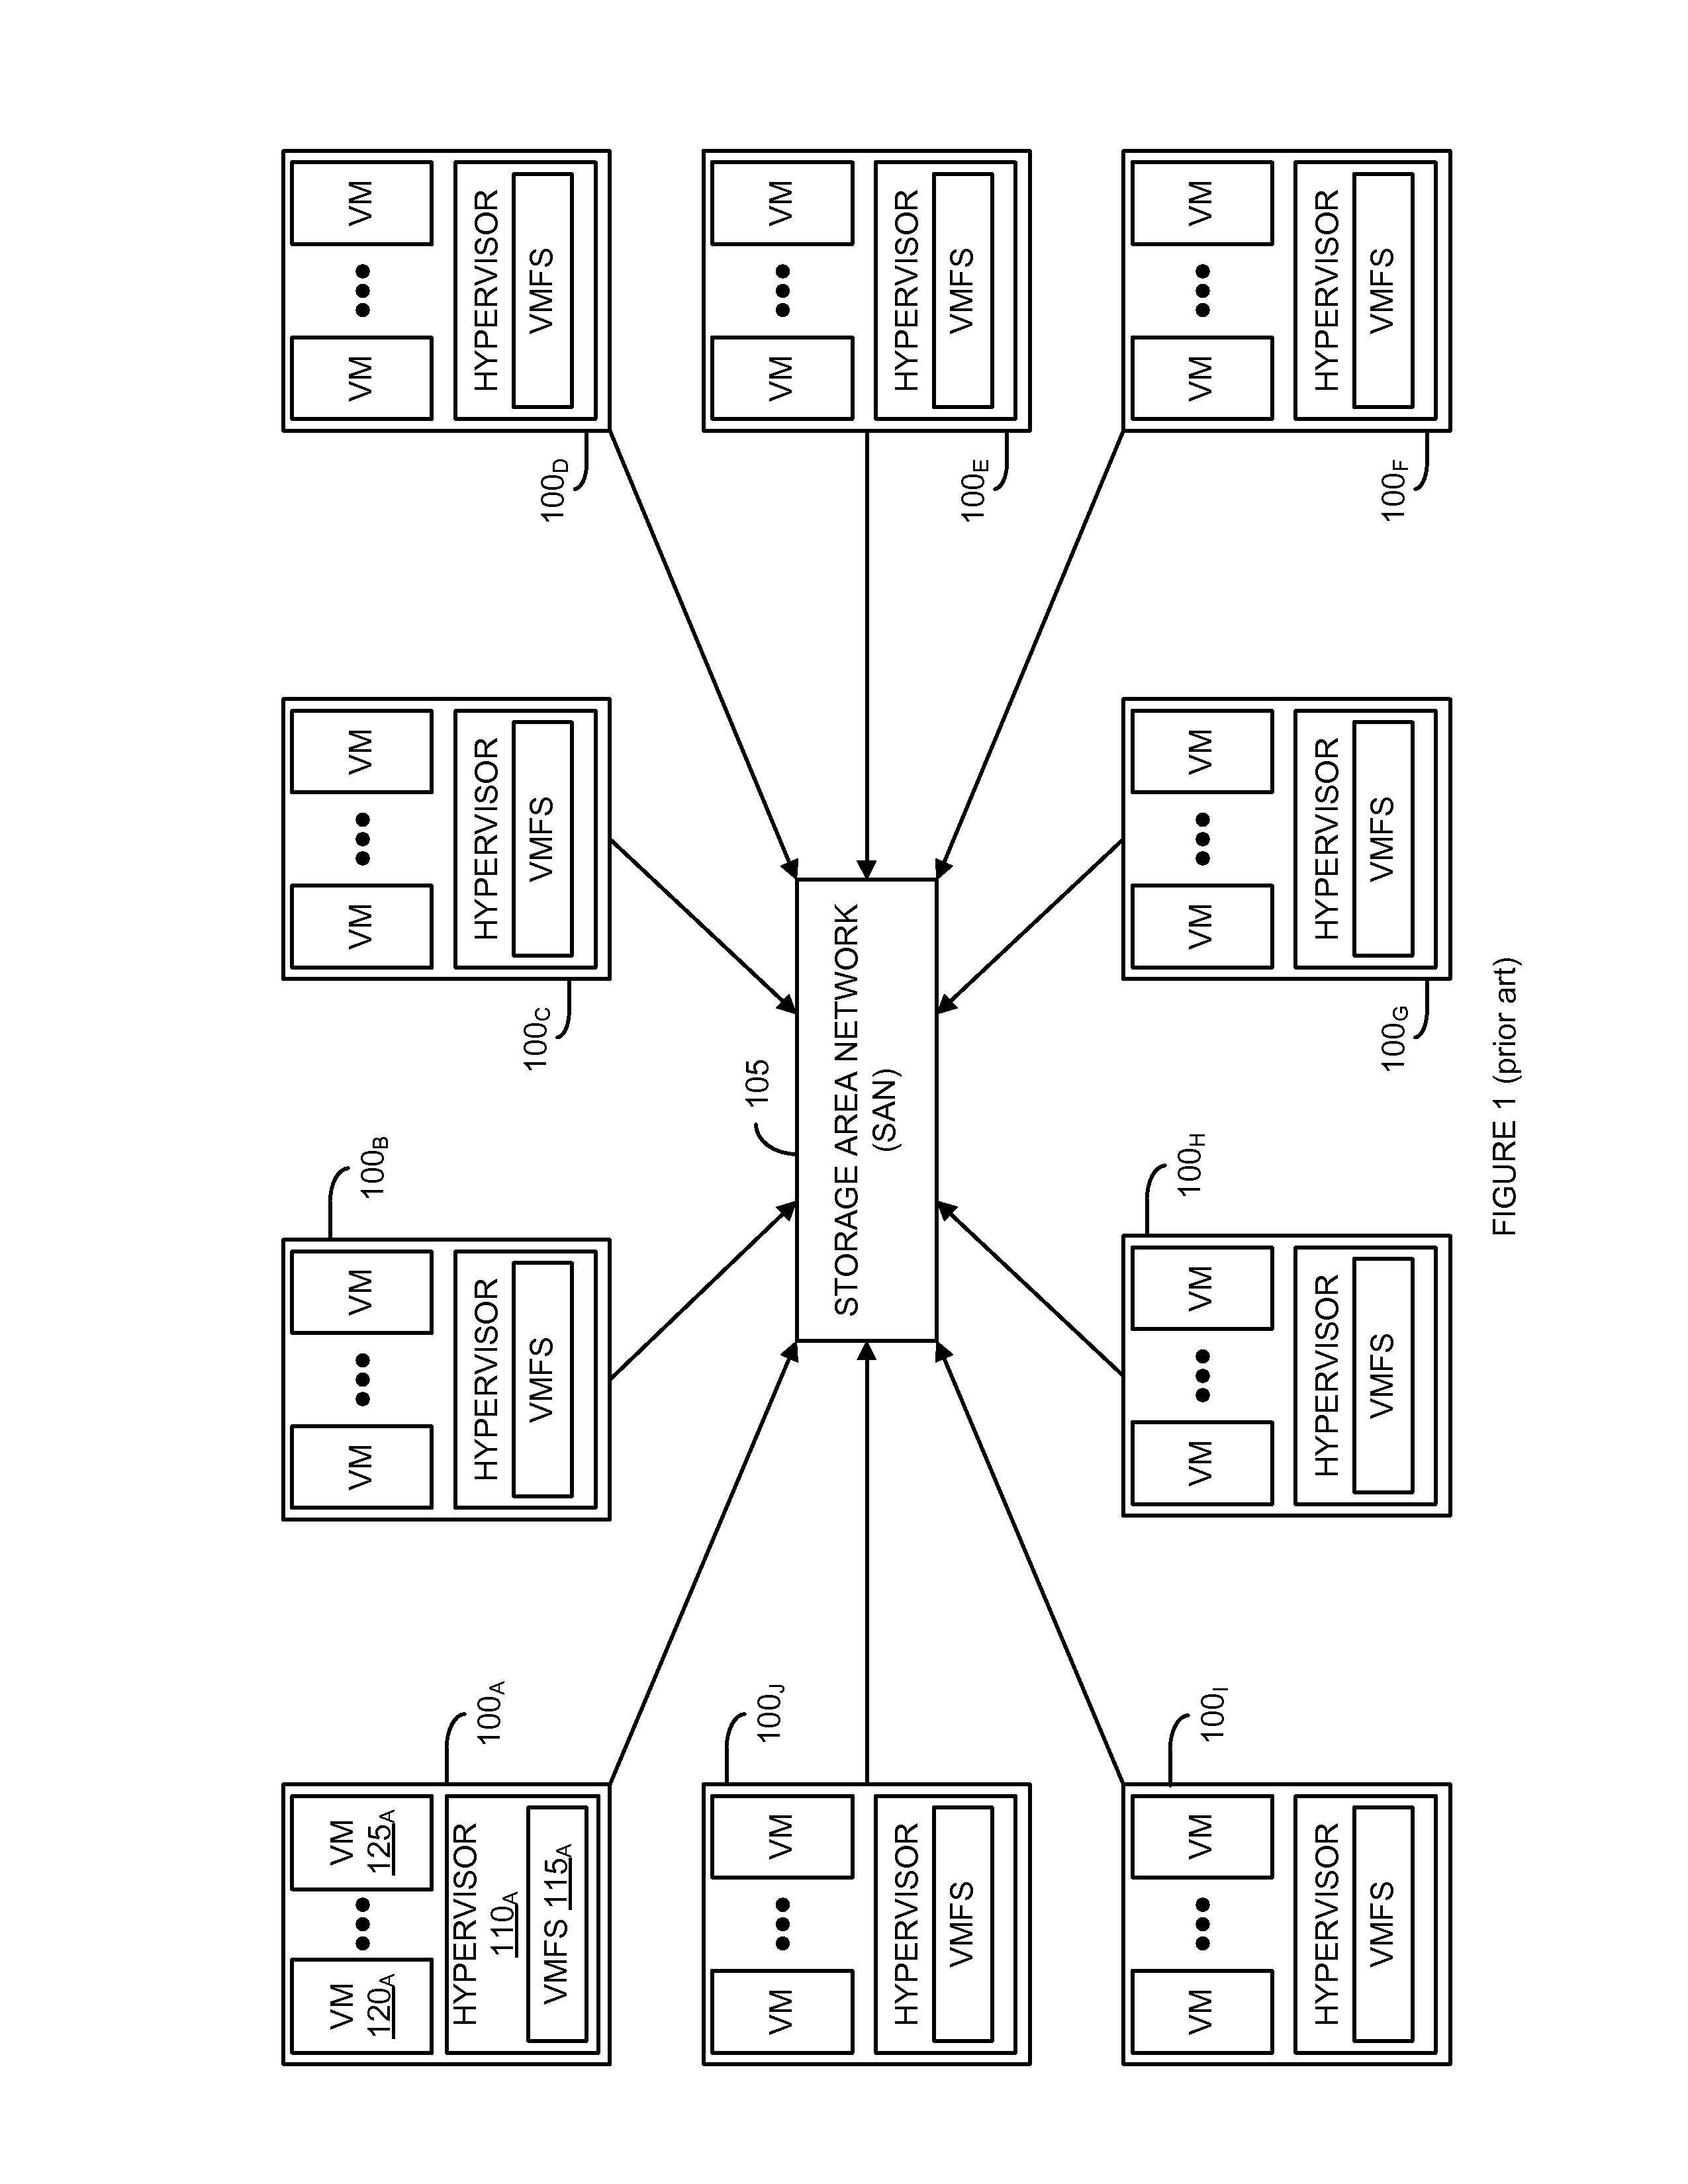 System and method for replicating disk images in a cloud computing based virtual machine file system